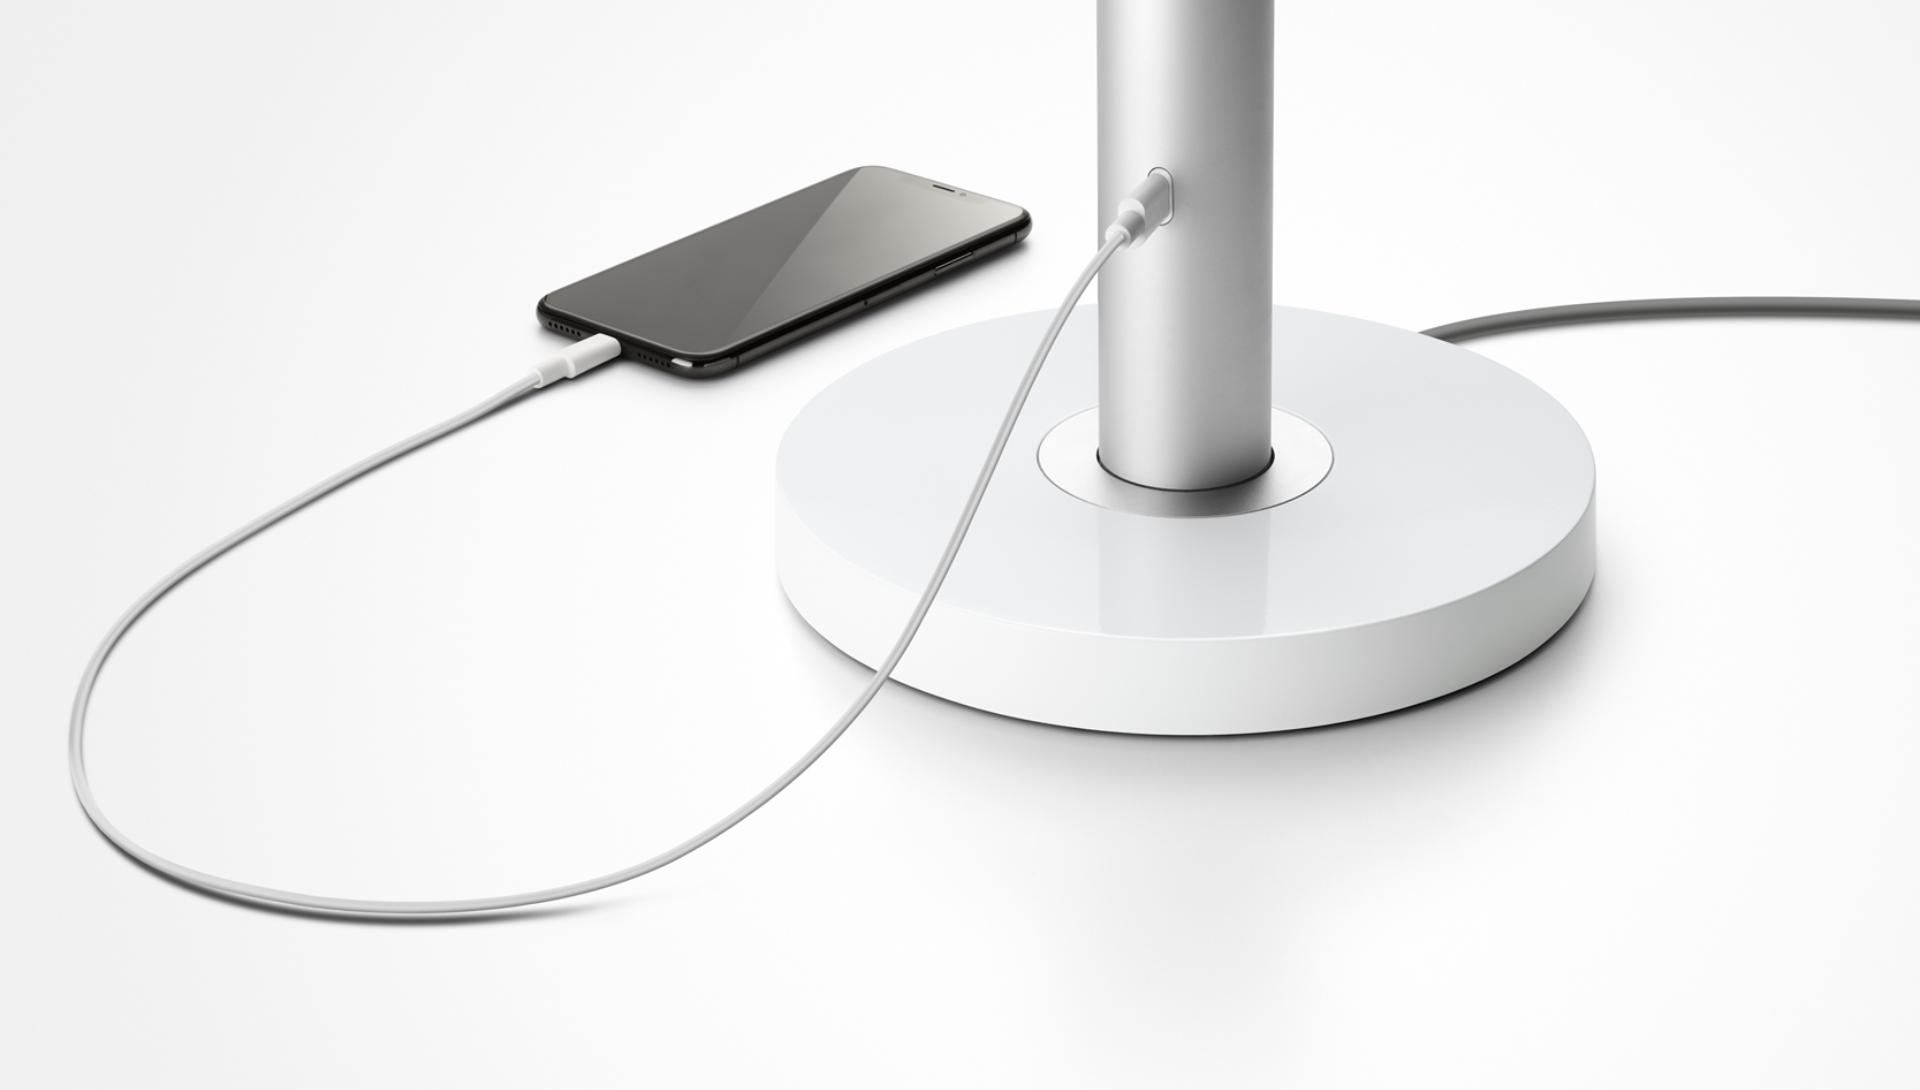 Dyson Lightcycle Morph light and its integrated USB-C charger